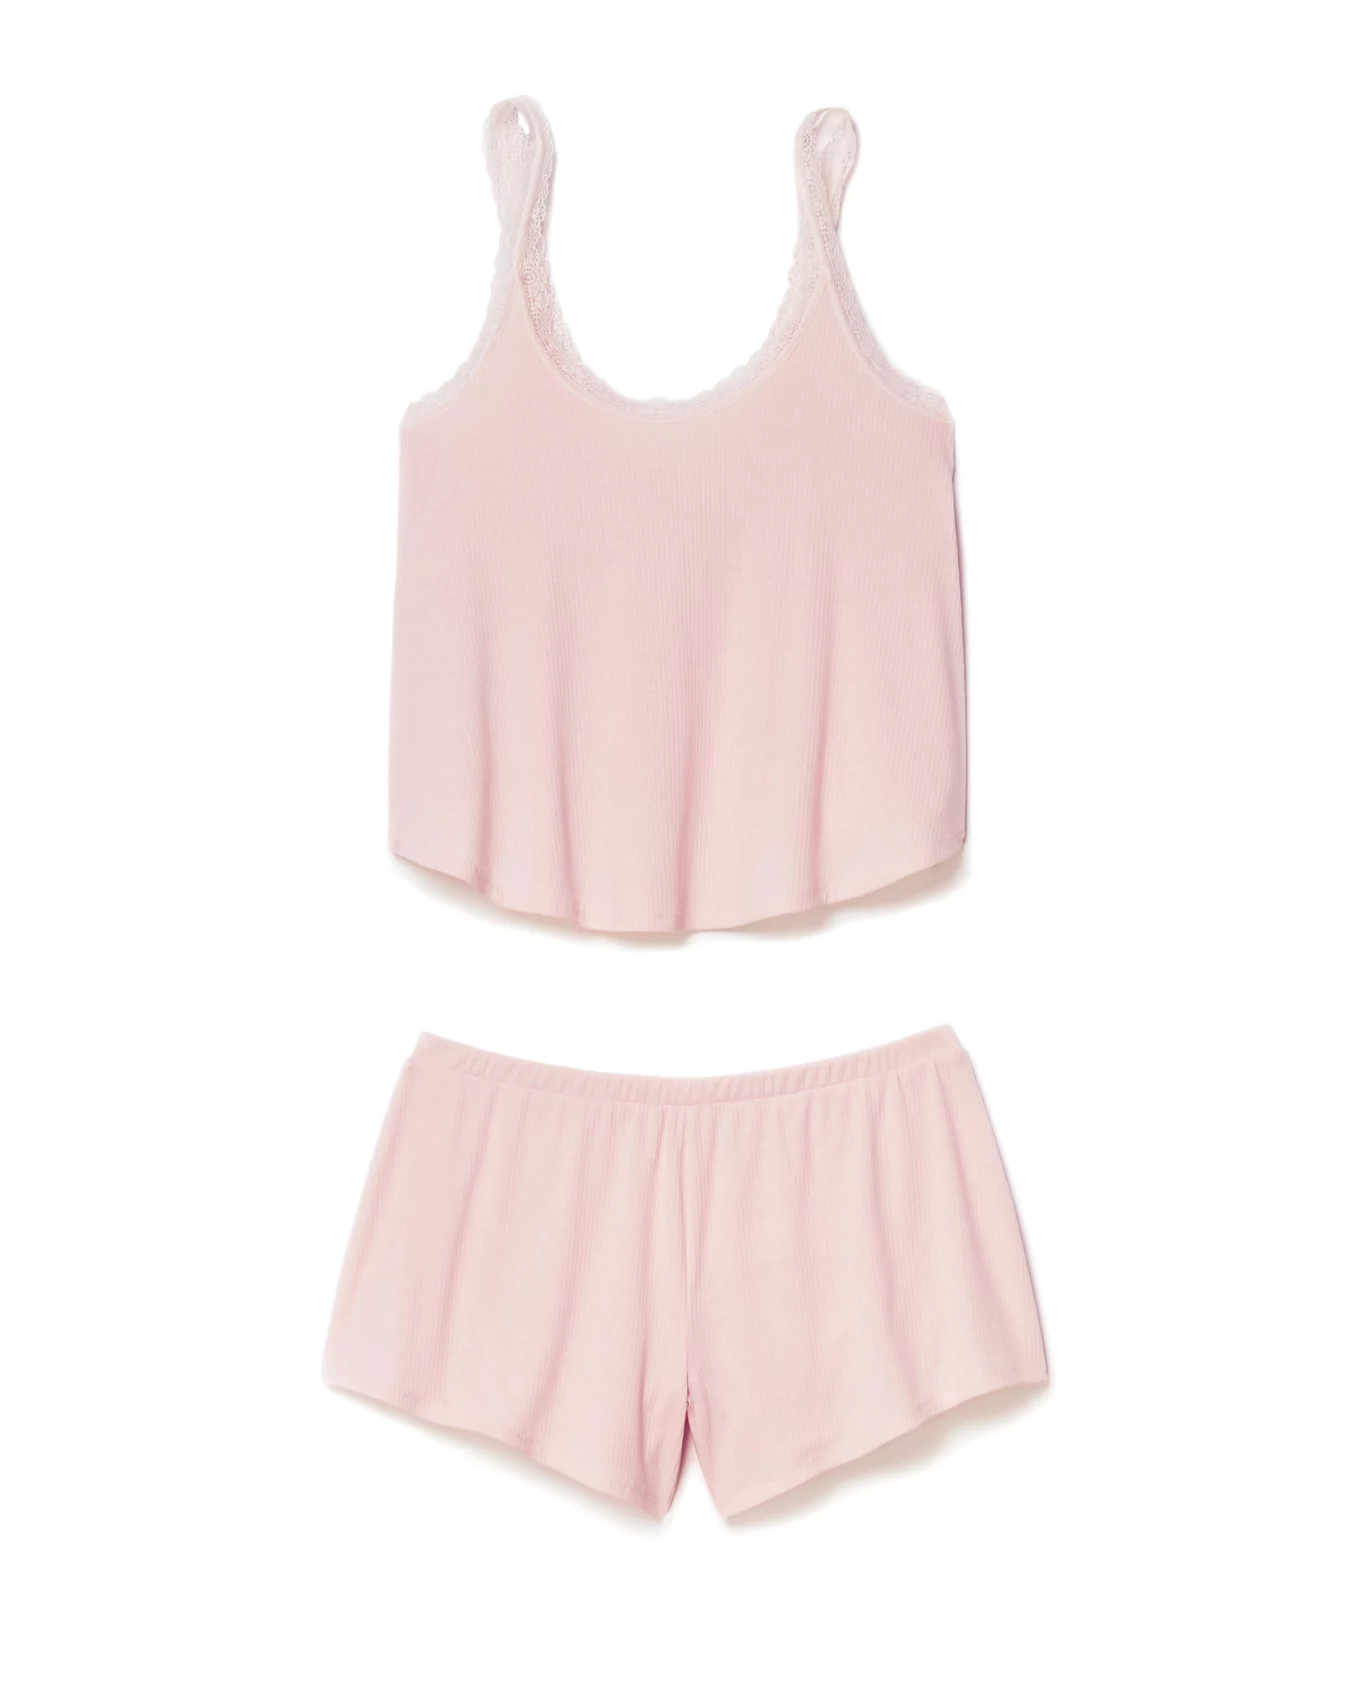 Cailey Light Pink Cami and Short Set, XS-XL